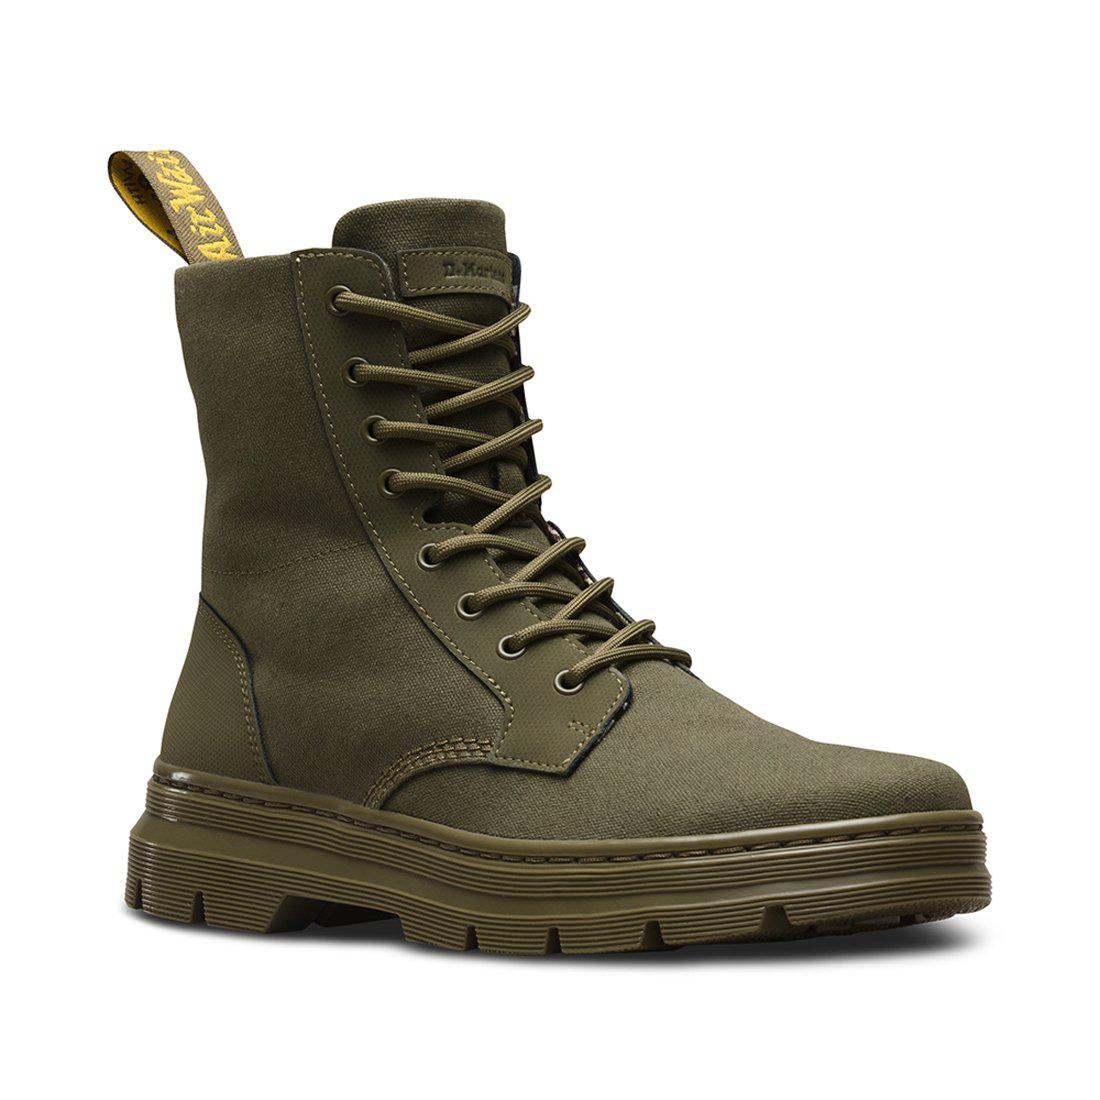 Dr. Martens Combs Ii Broder + Canvas in Green for Men - Lyst